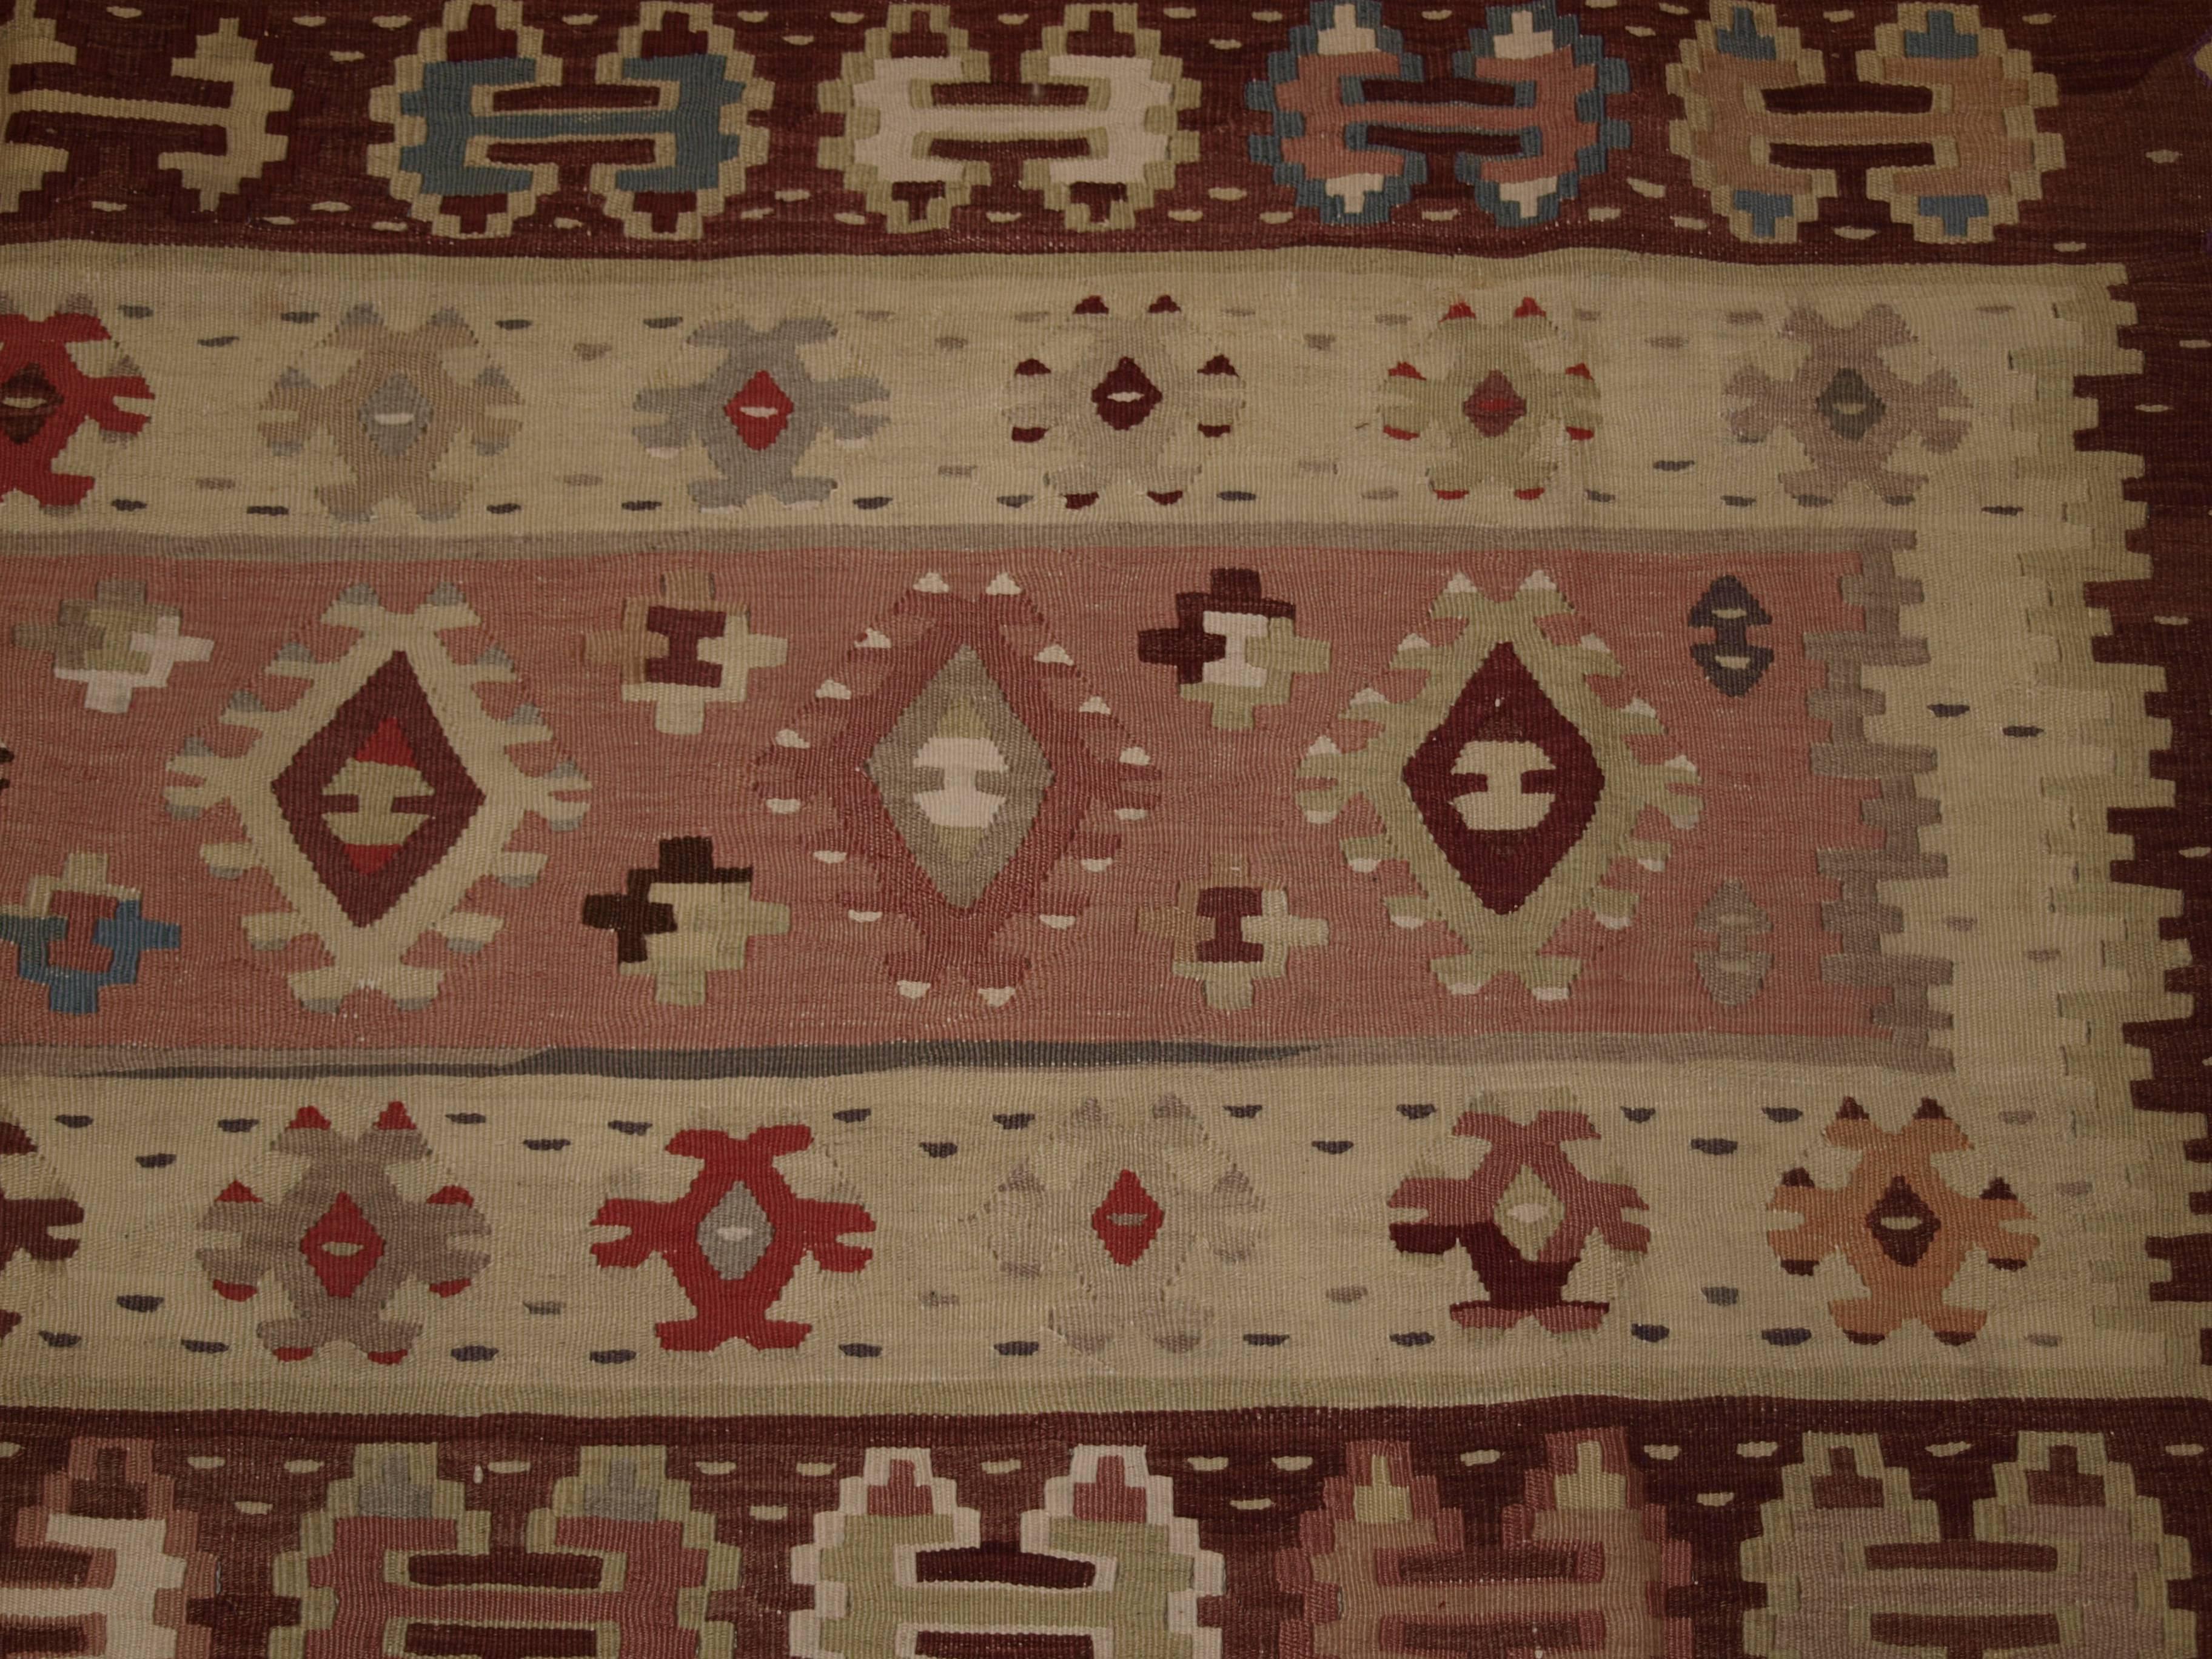 Old Turkish Sarkoy kilim rug, soft colours, banded design, square shape, circa 1920.
Size: 8ft 0in x 7ft 3in (244 x 220cm).

Old Anatolian Sharkoy Kilim, Western Turkey

circa 1920

Sharkoy kilims are also known as Sarkoy or Thracian, they